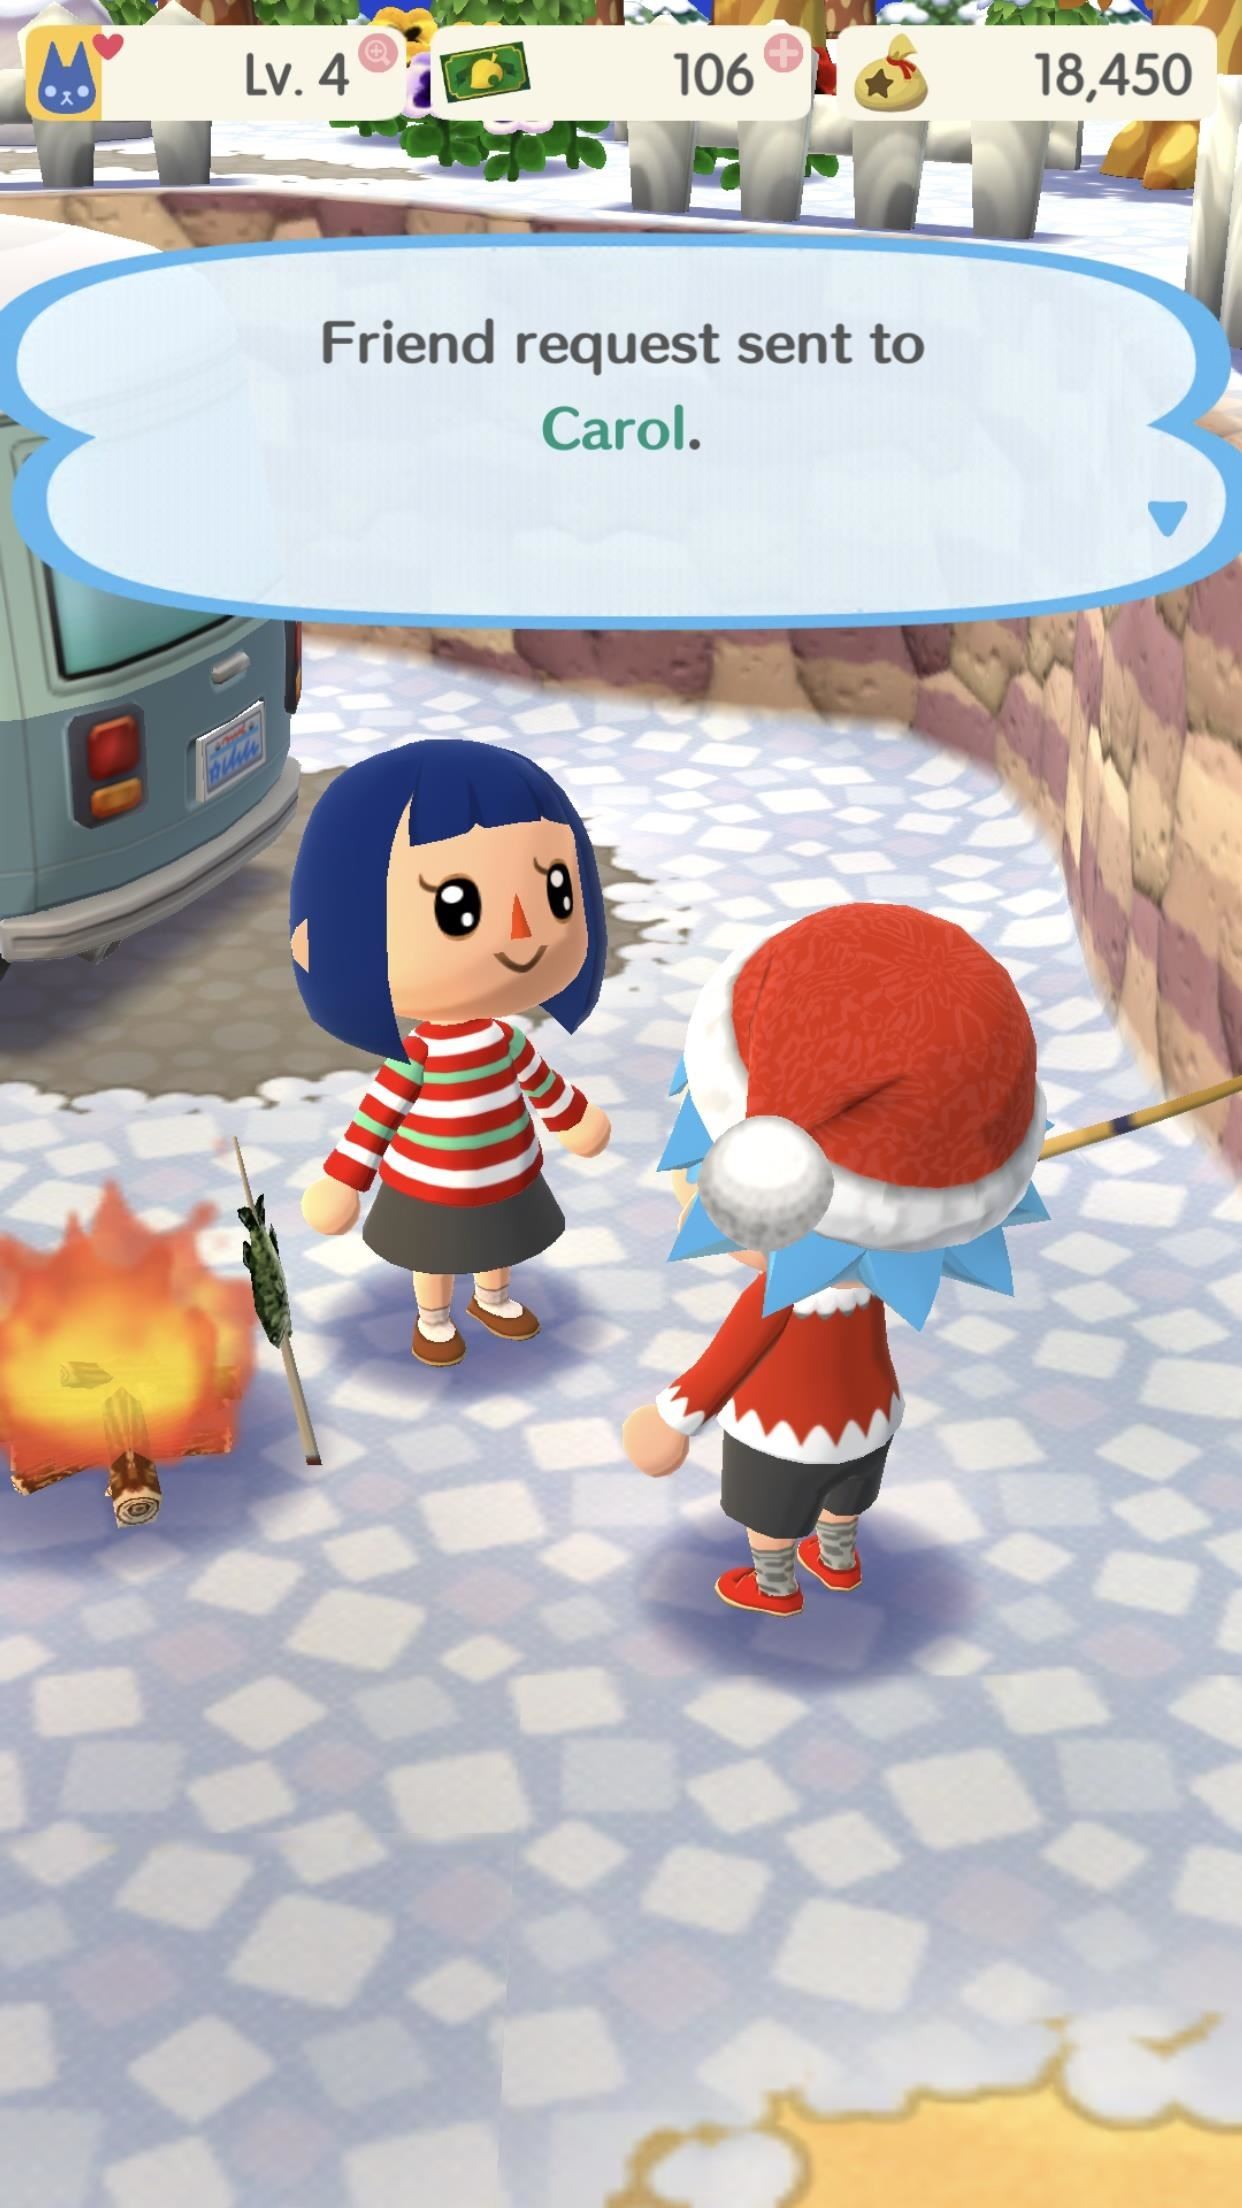 Pocket Camp 101: How to Make Human Friends in Animal Crossing